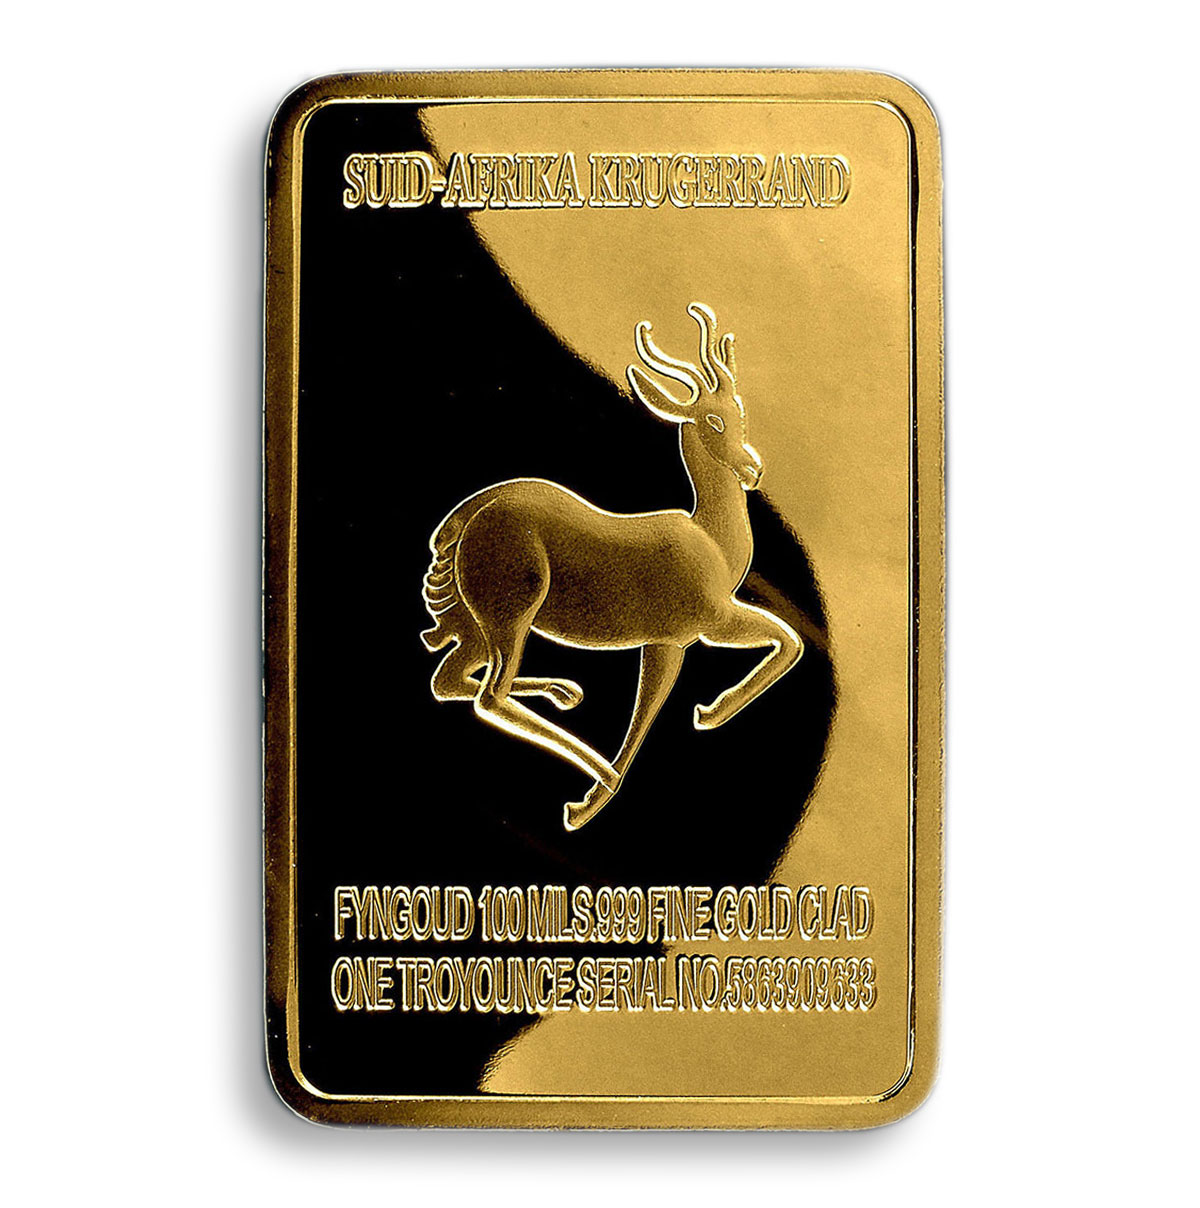 South Africa, Lion, Gold Plated bar, Nature, Animal, Wild